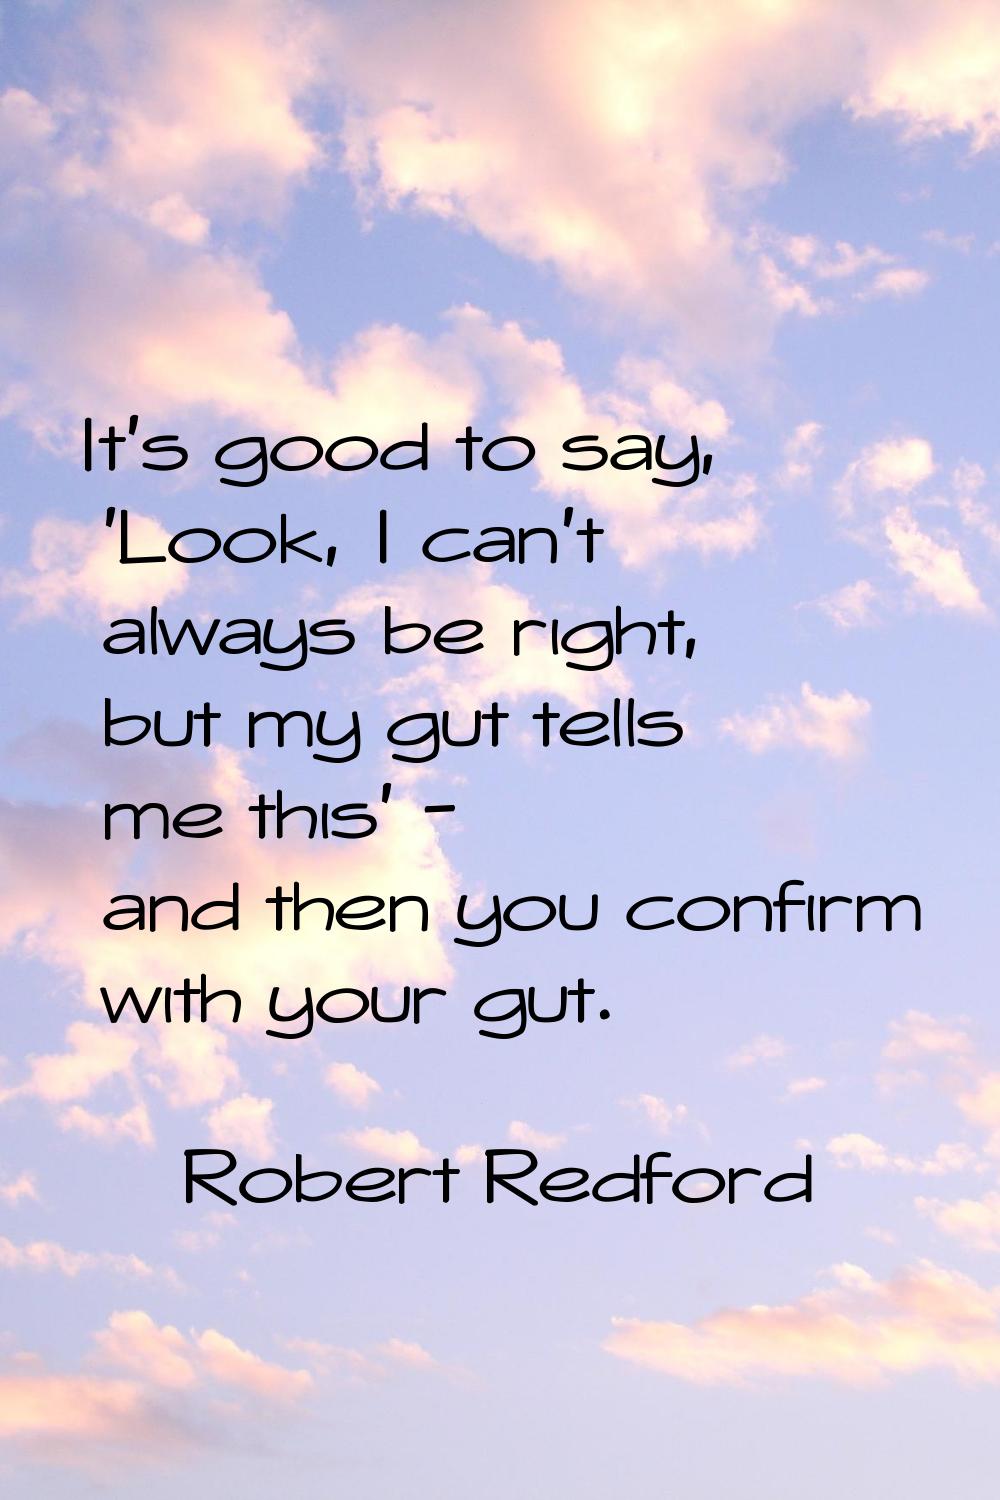 It's good to say, 'Look, I can't always be right, but my gut tells me this' - and then you confirm 